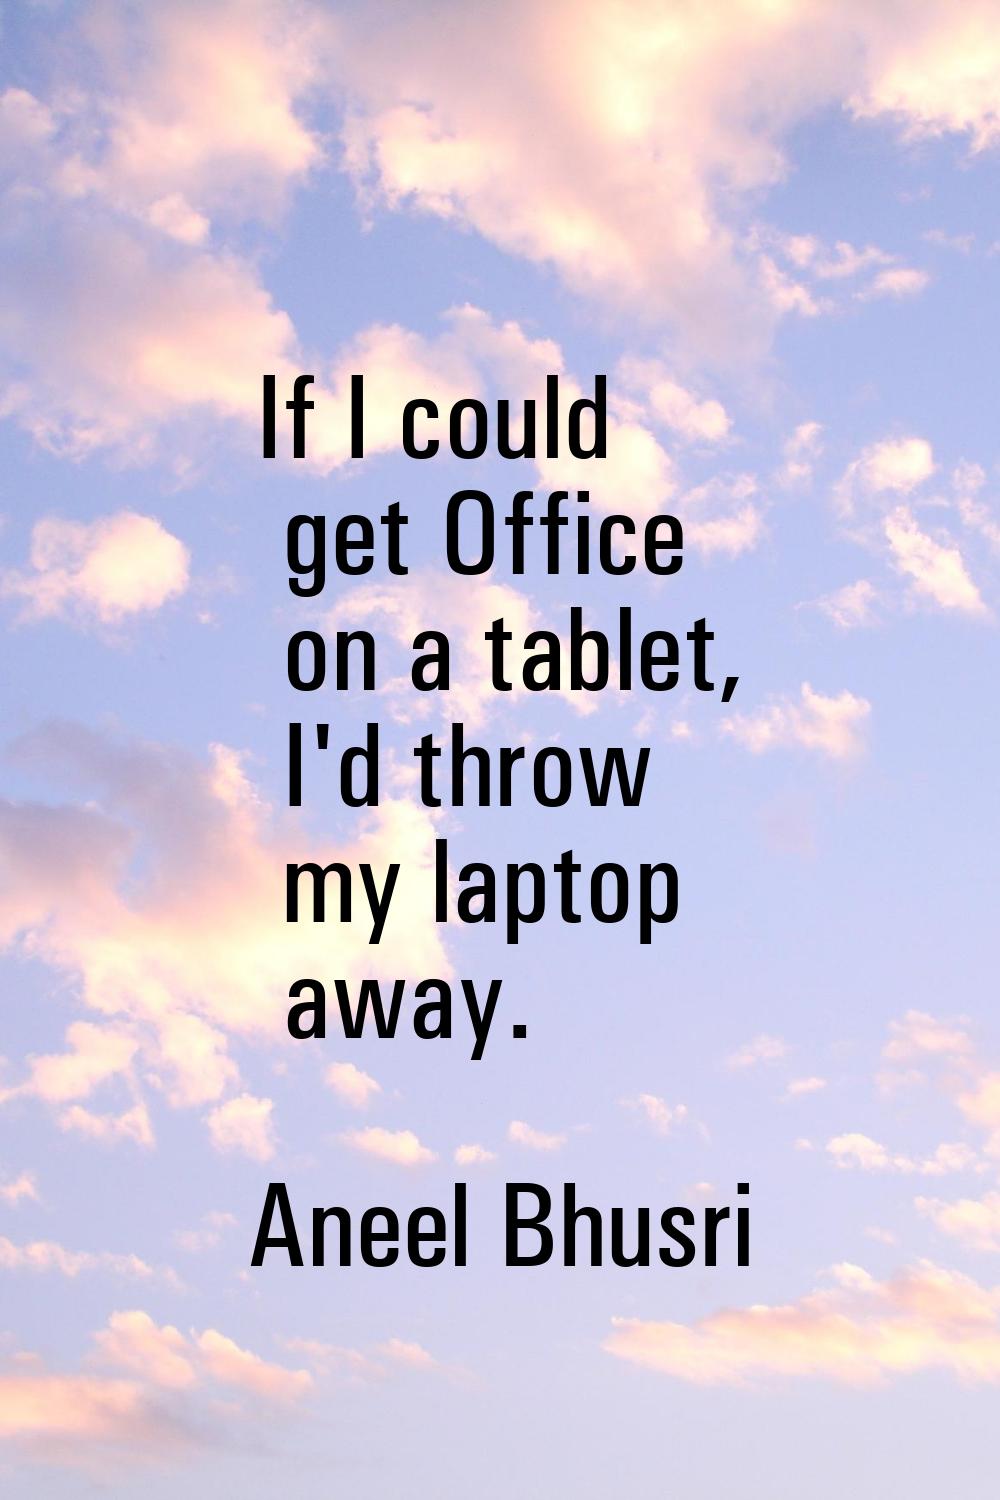 If I could get Office on a tablet, I'd throw my laptop away.